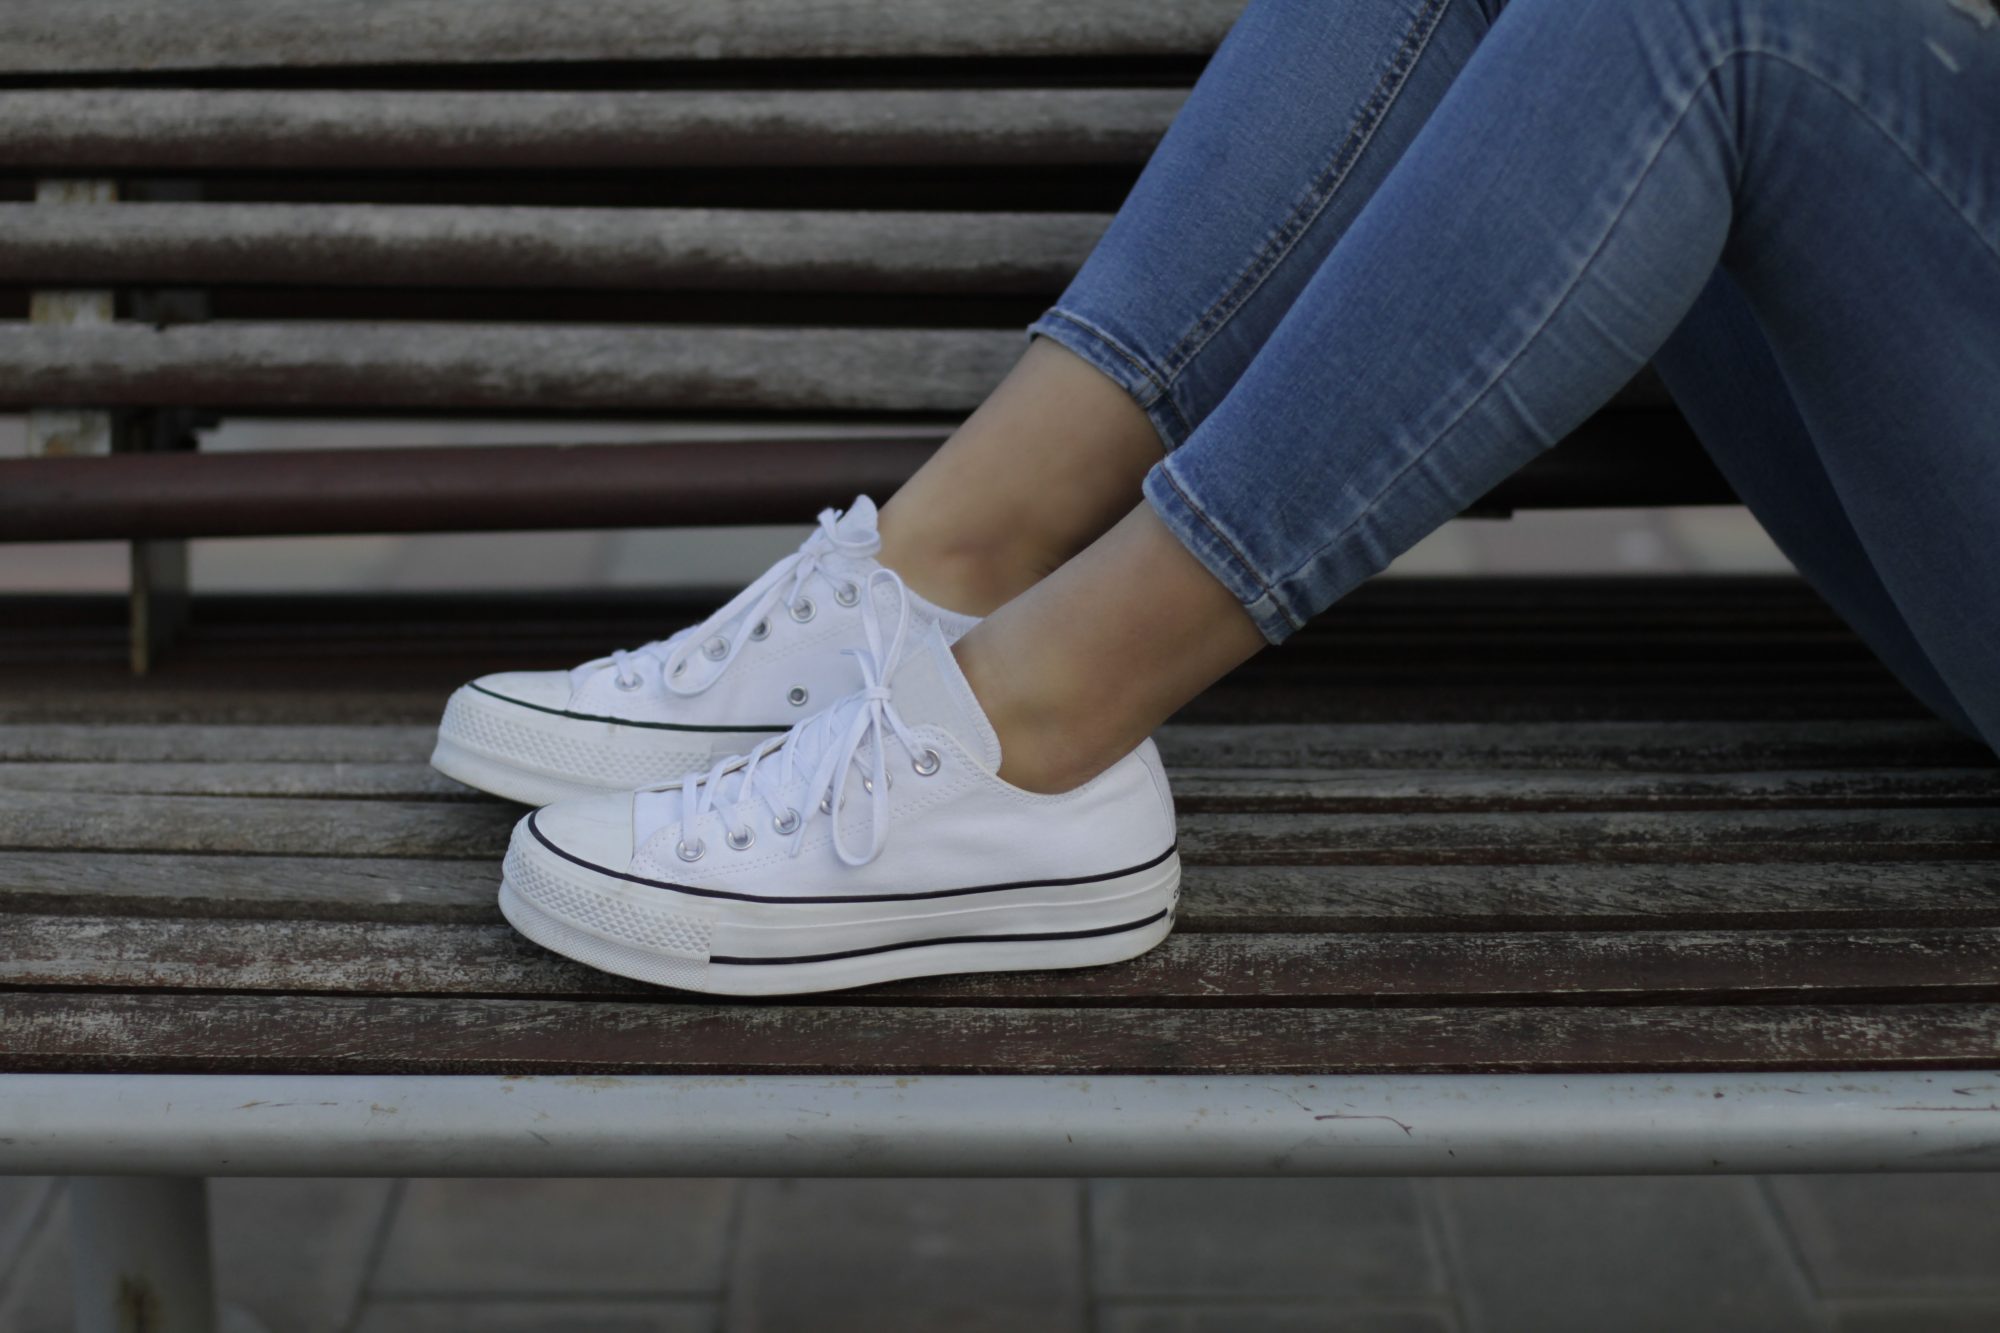 How to Clean Sneakers Based On MaterialHelloGiggles